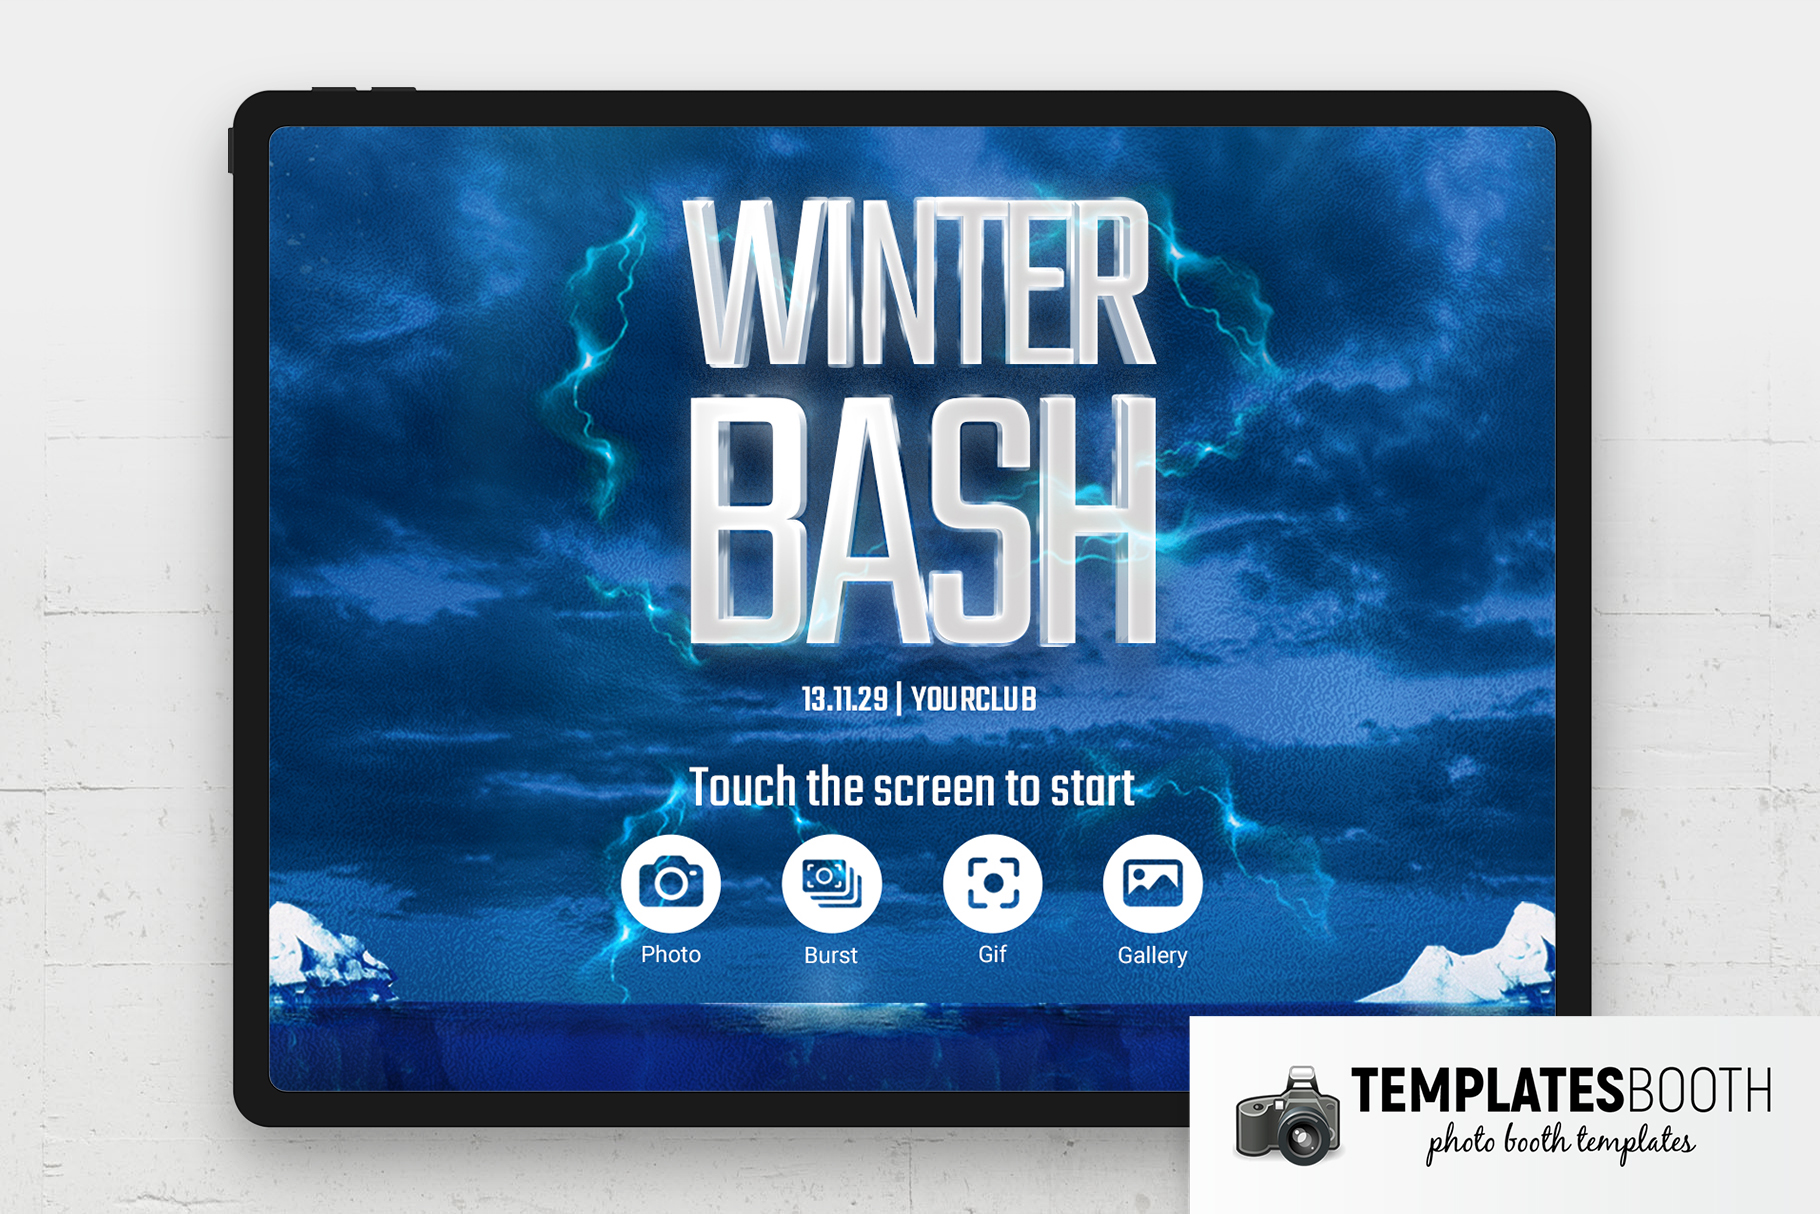 Winter Bash Photo Booth Welcome Screen